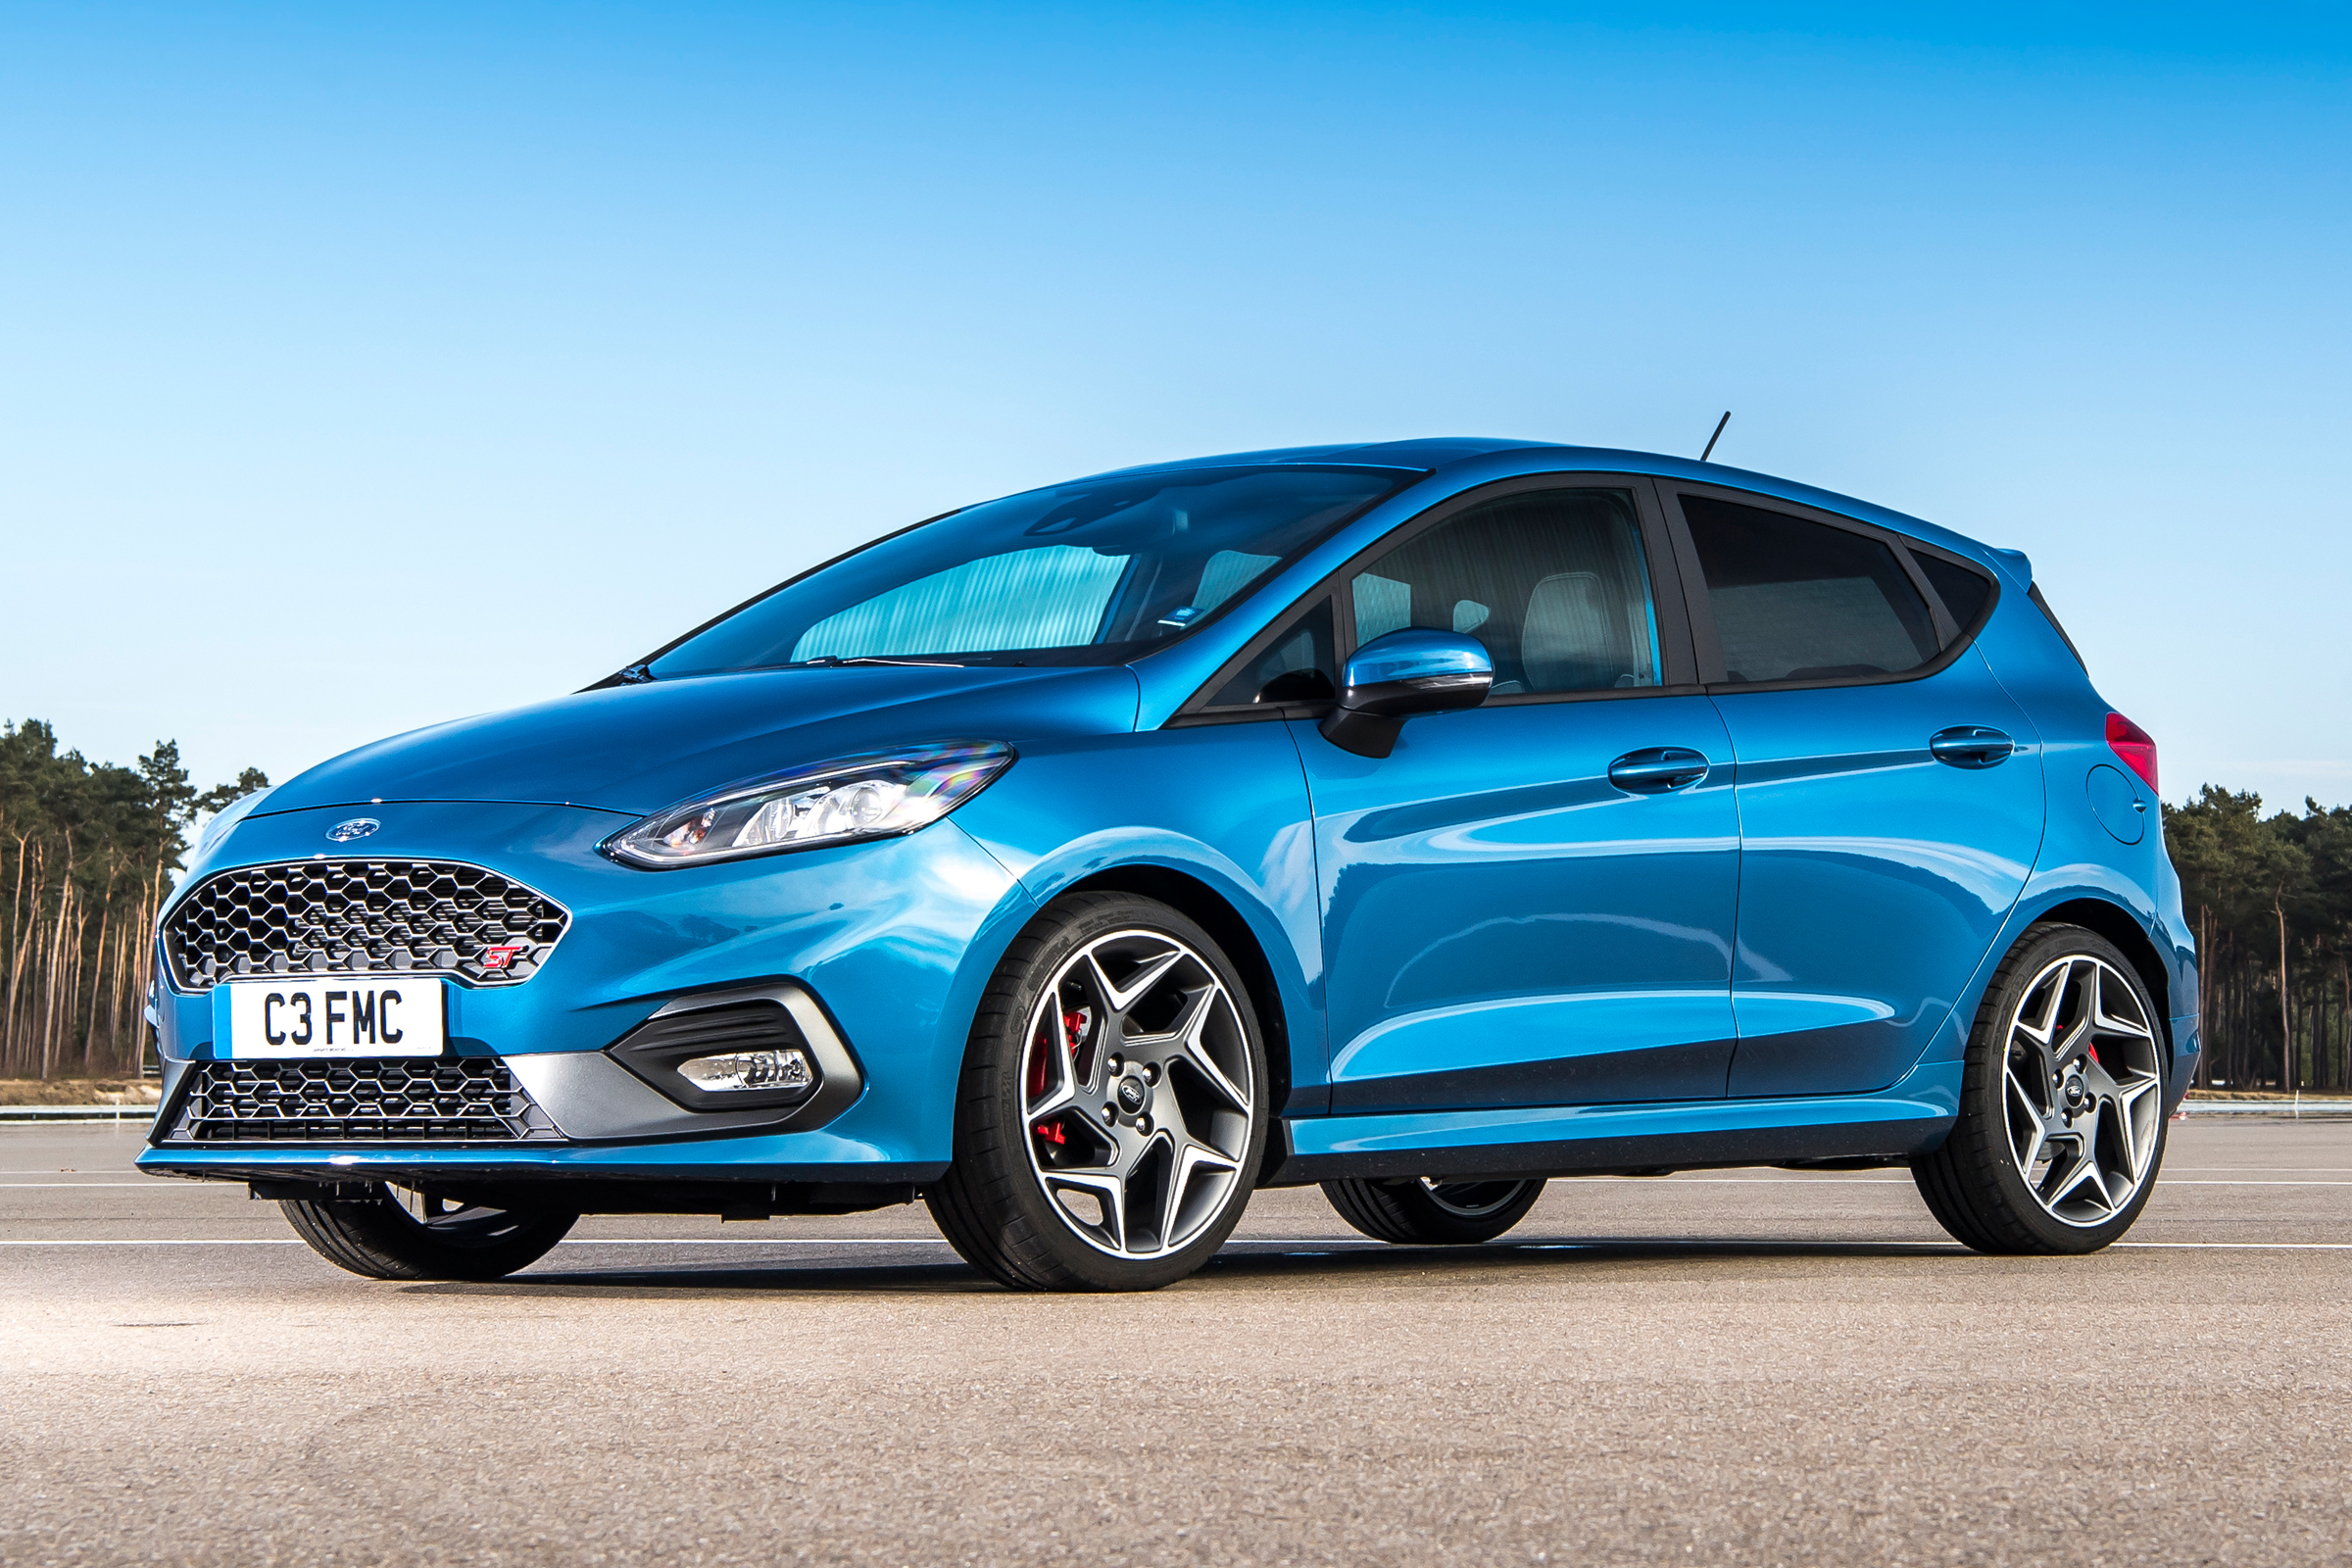 New 2018 Ford Fiesta ST has 197bhp and track mode Carbuyer